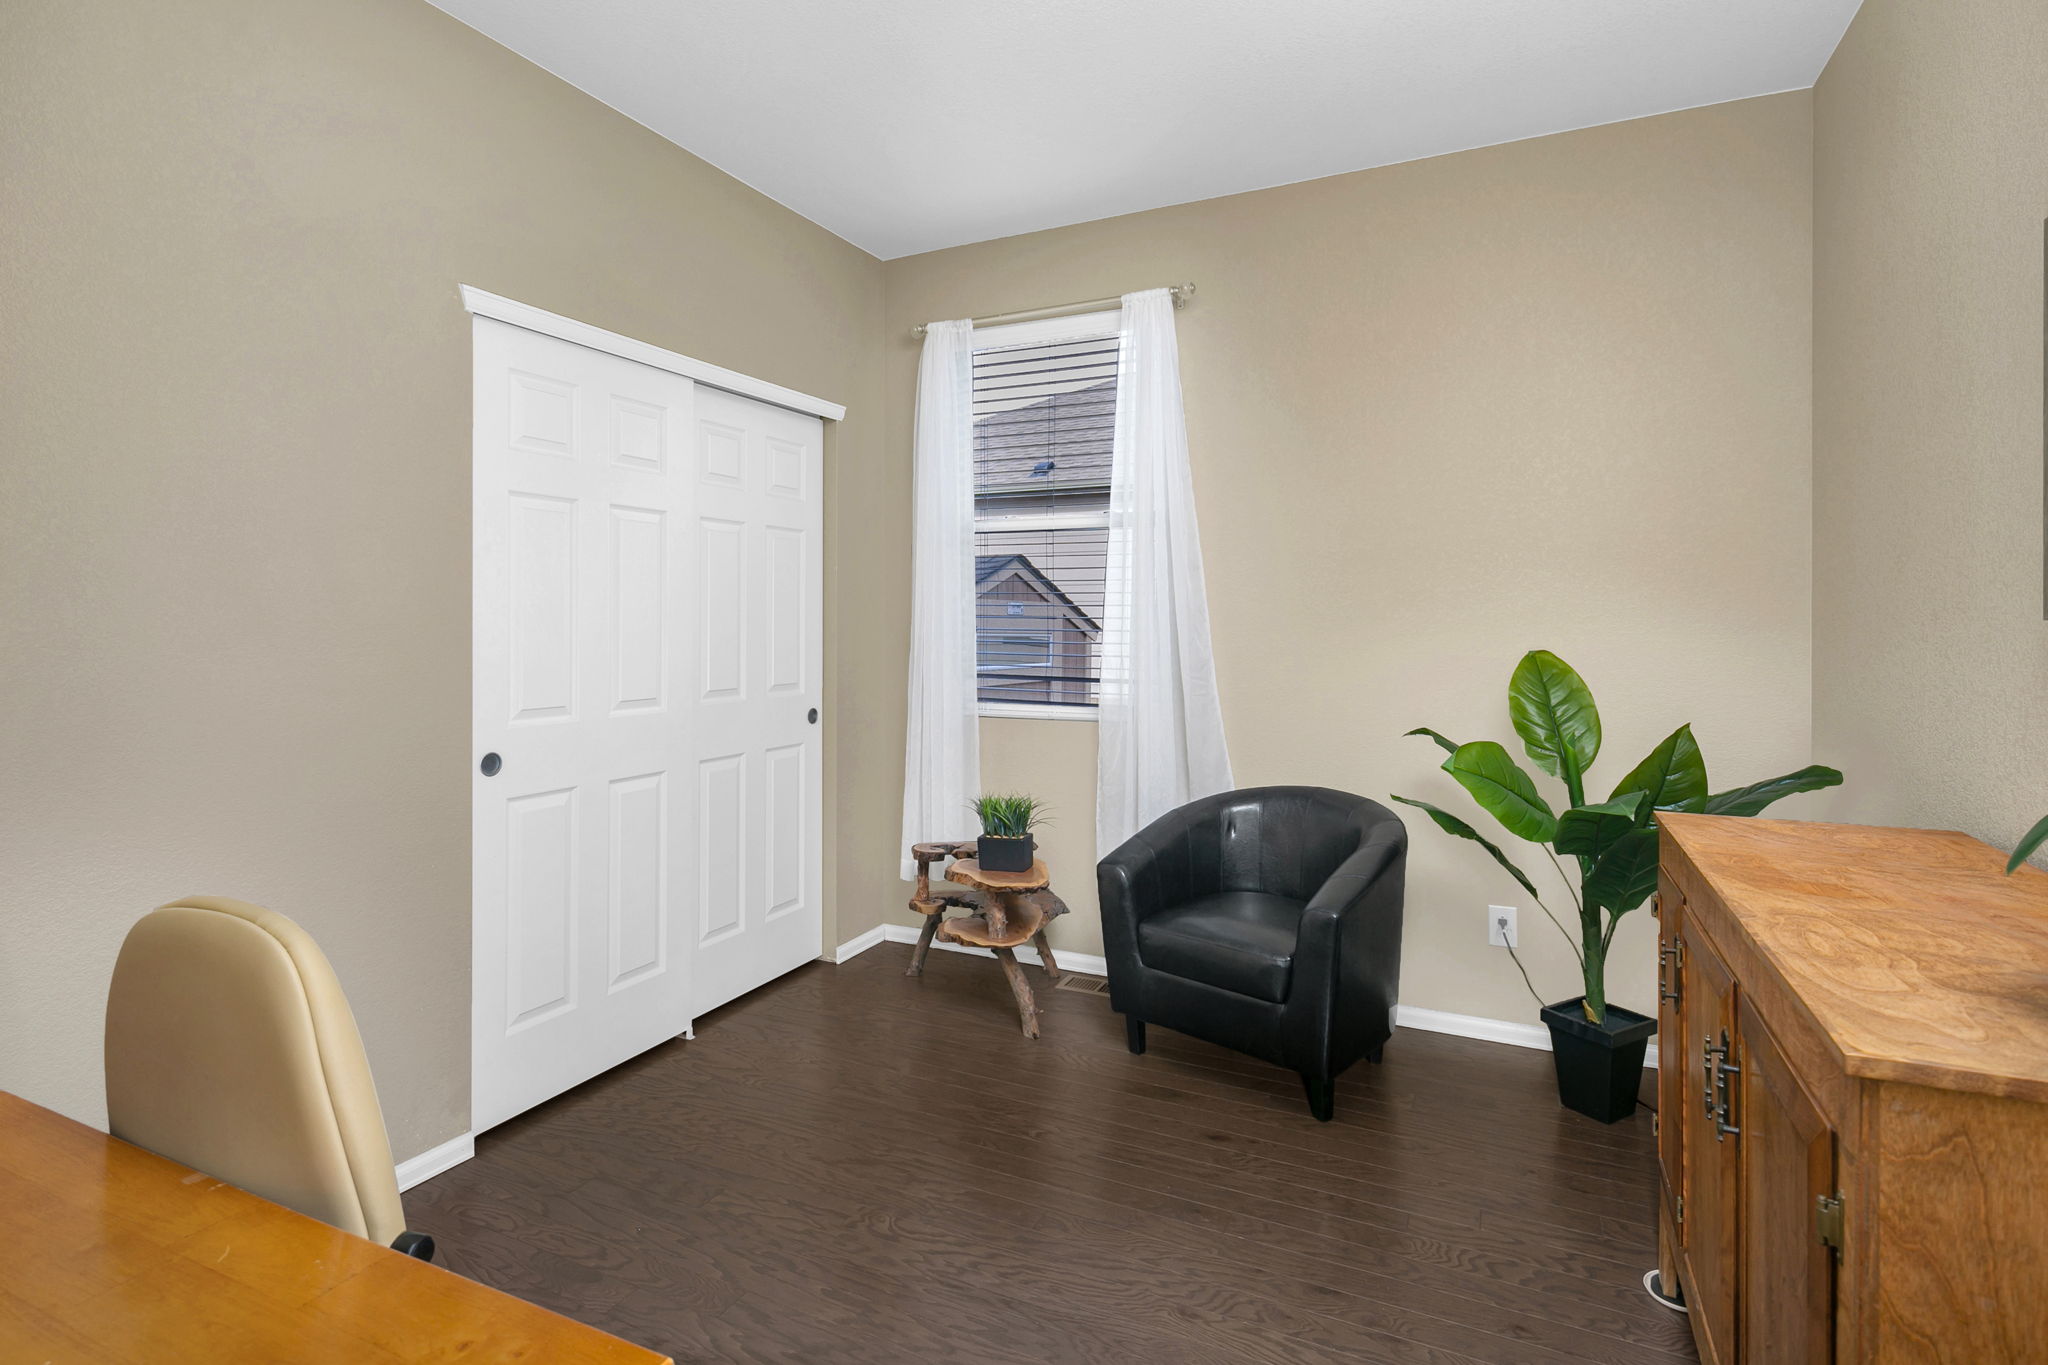 Additional Guest Bedroom or Office